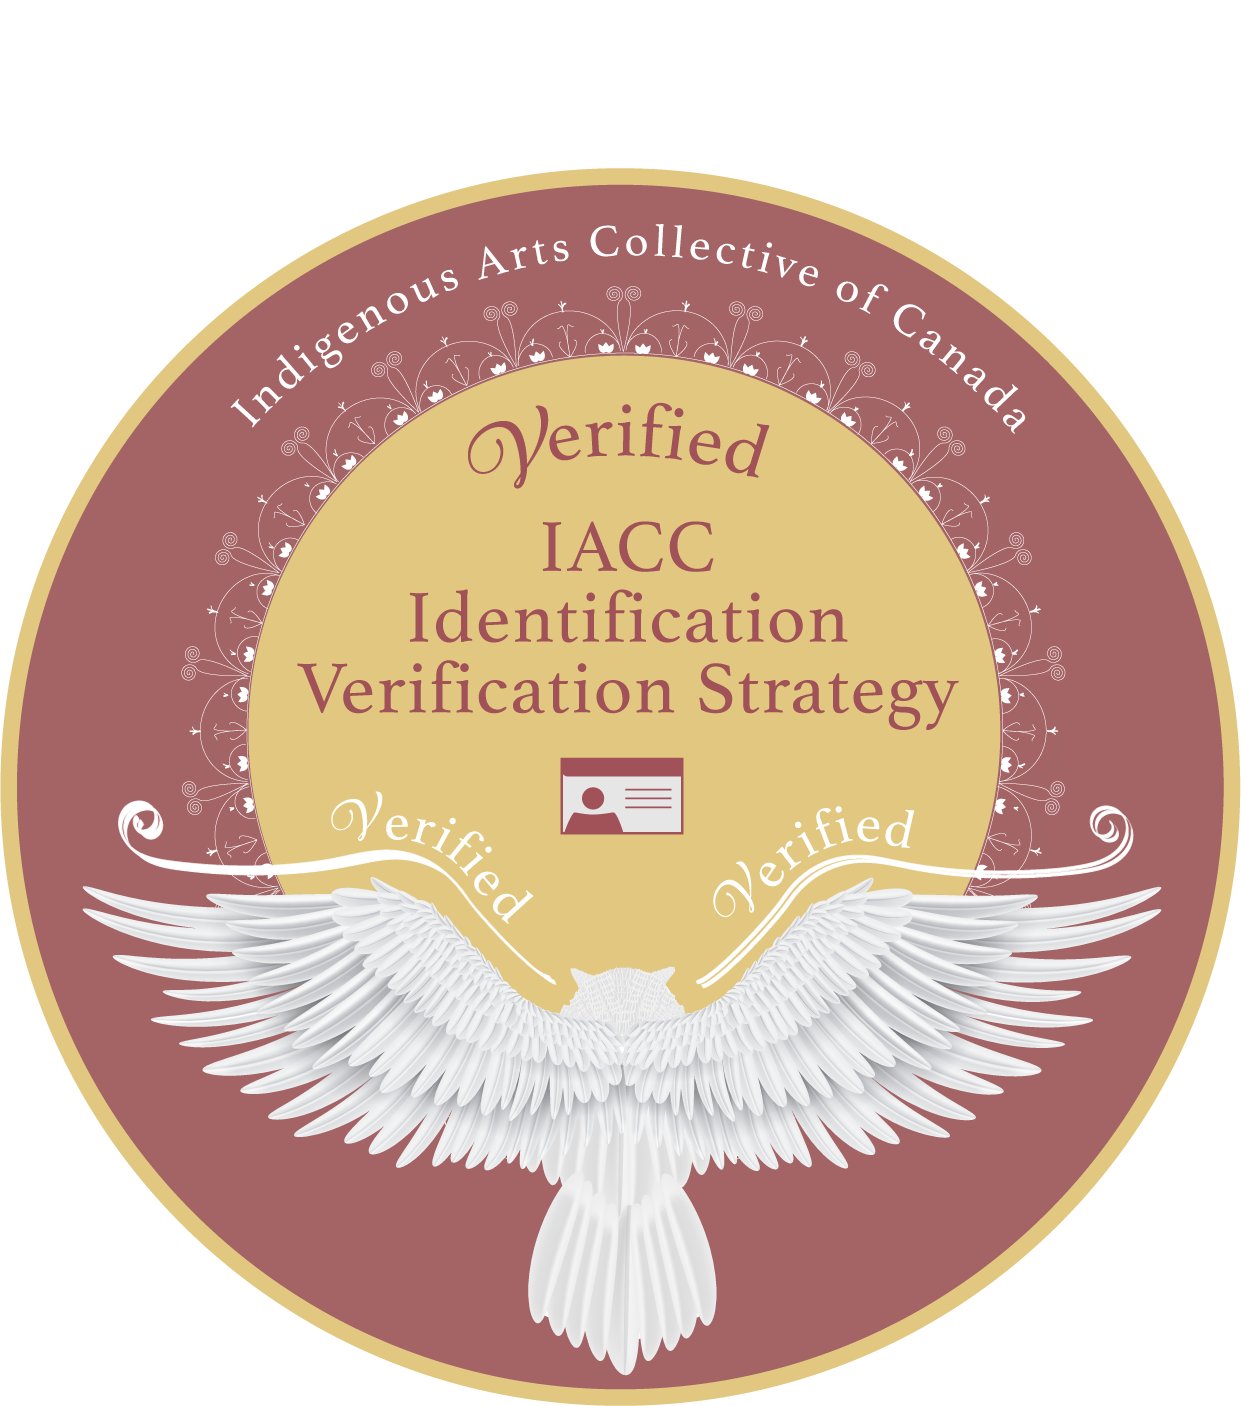 IACC Indigenous Identification Strategy, Metis, First Nations, Inuit, pretendian, race shifters